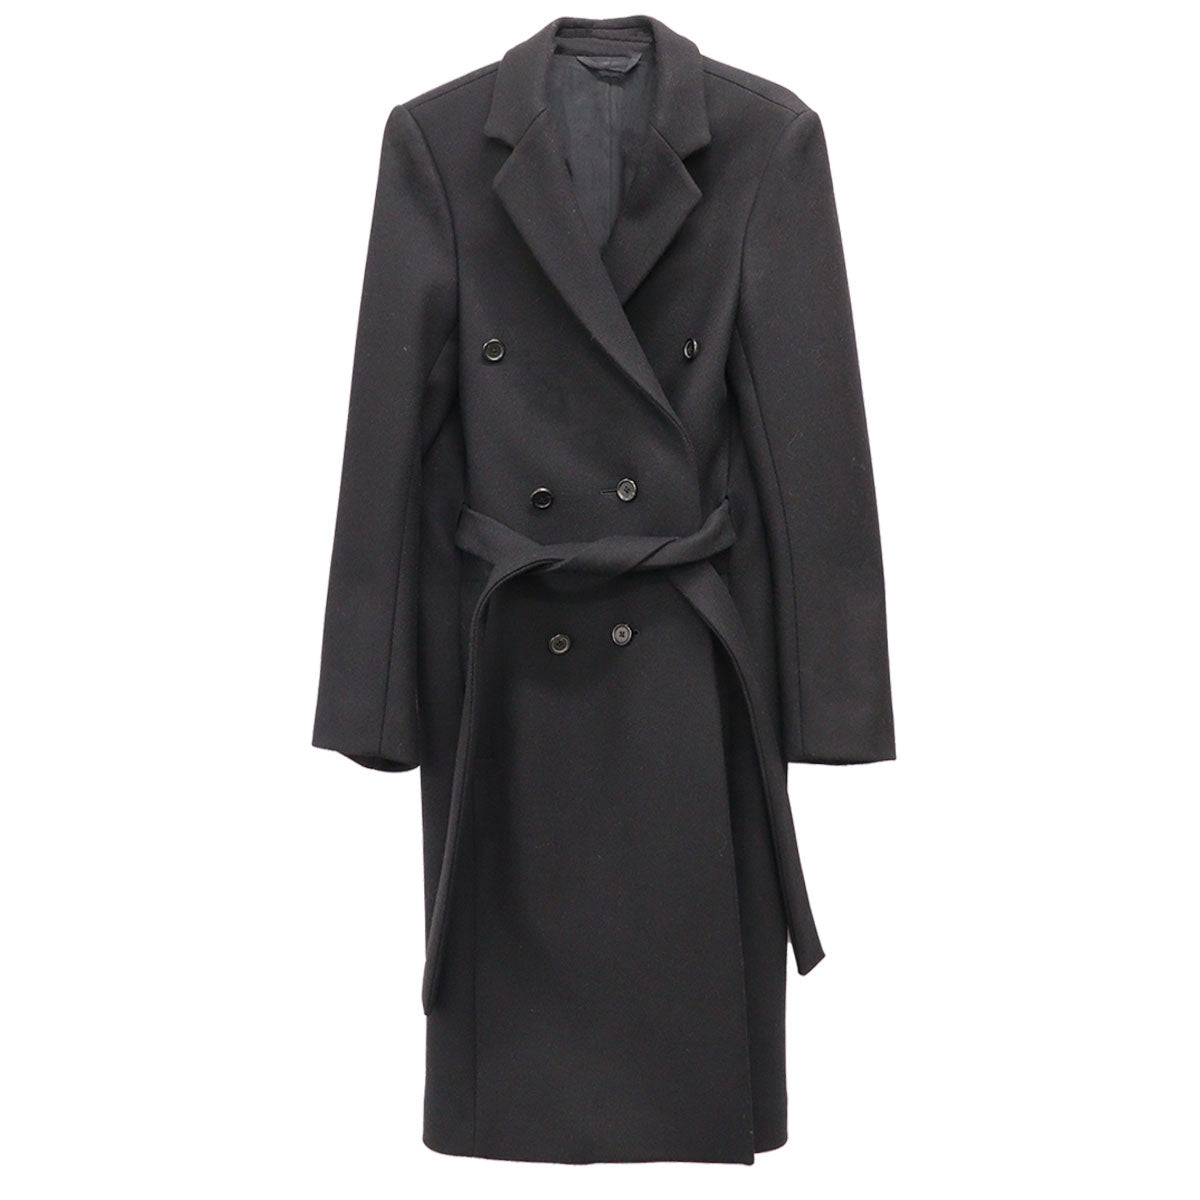 COAT CAPPOTTO - Ann Demeulemeester